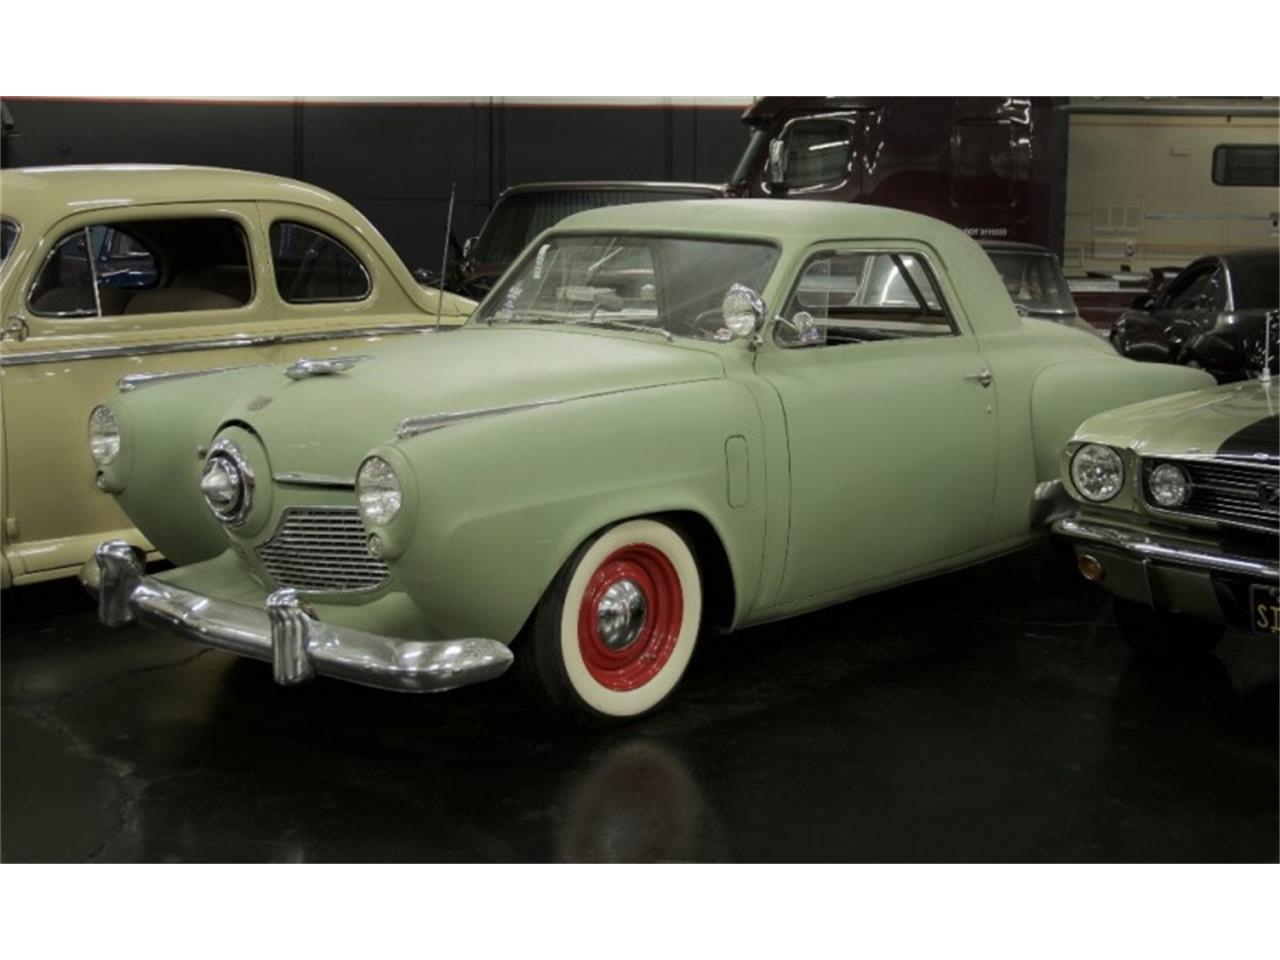 1951 Studebaker Business Coupe for sale in Milpitas, CA